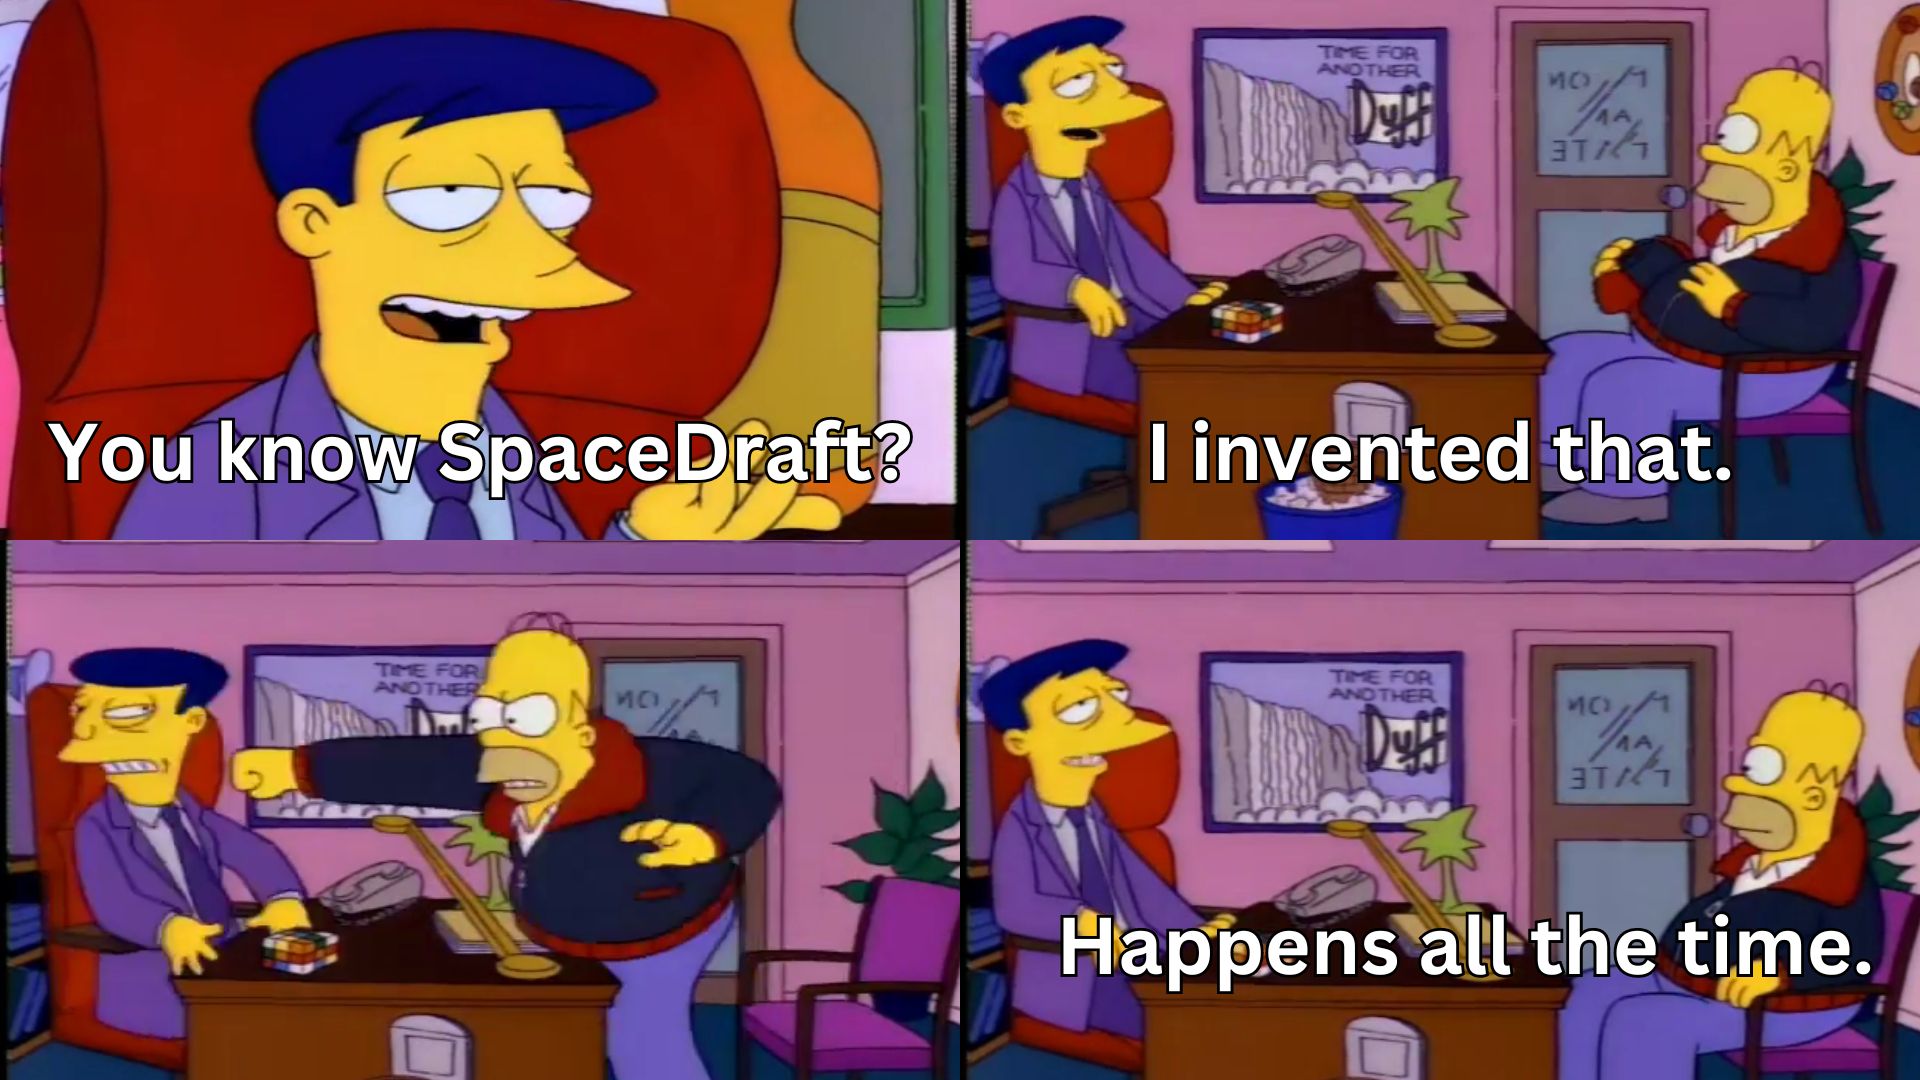 You know SpaceDraft